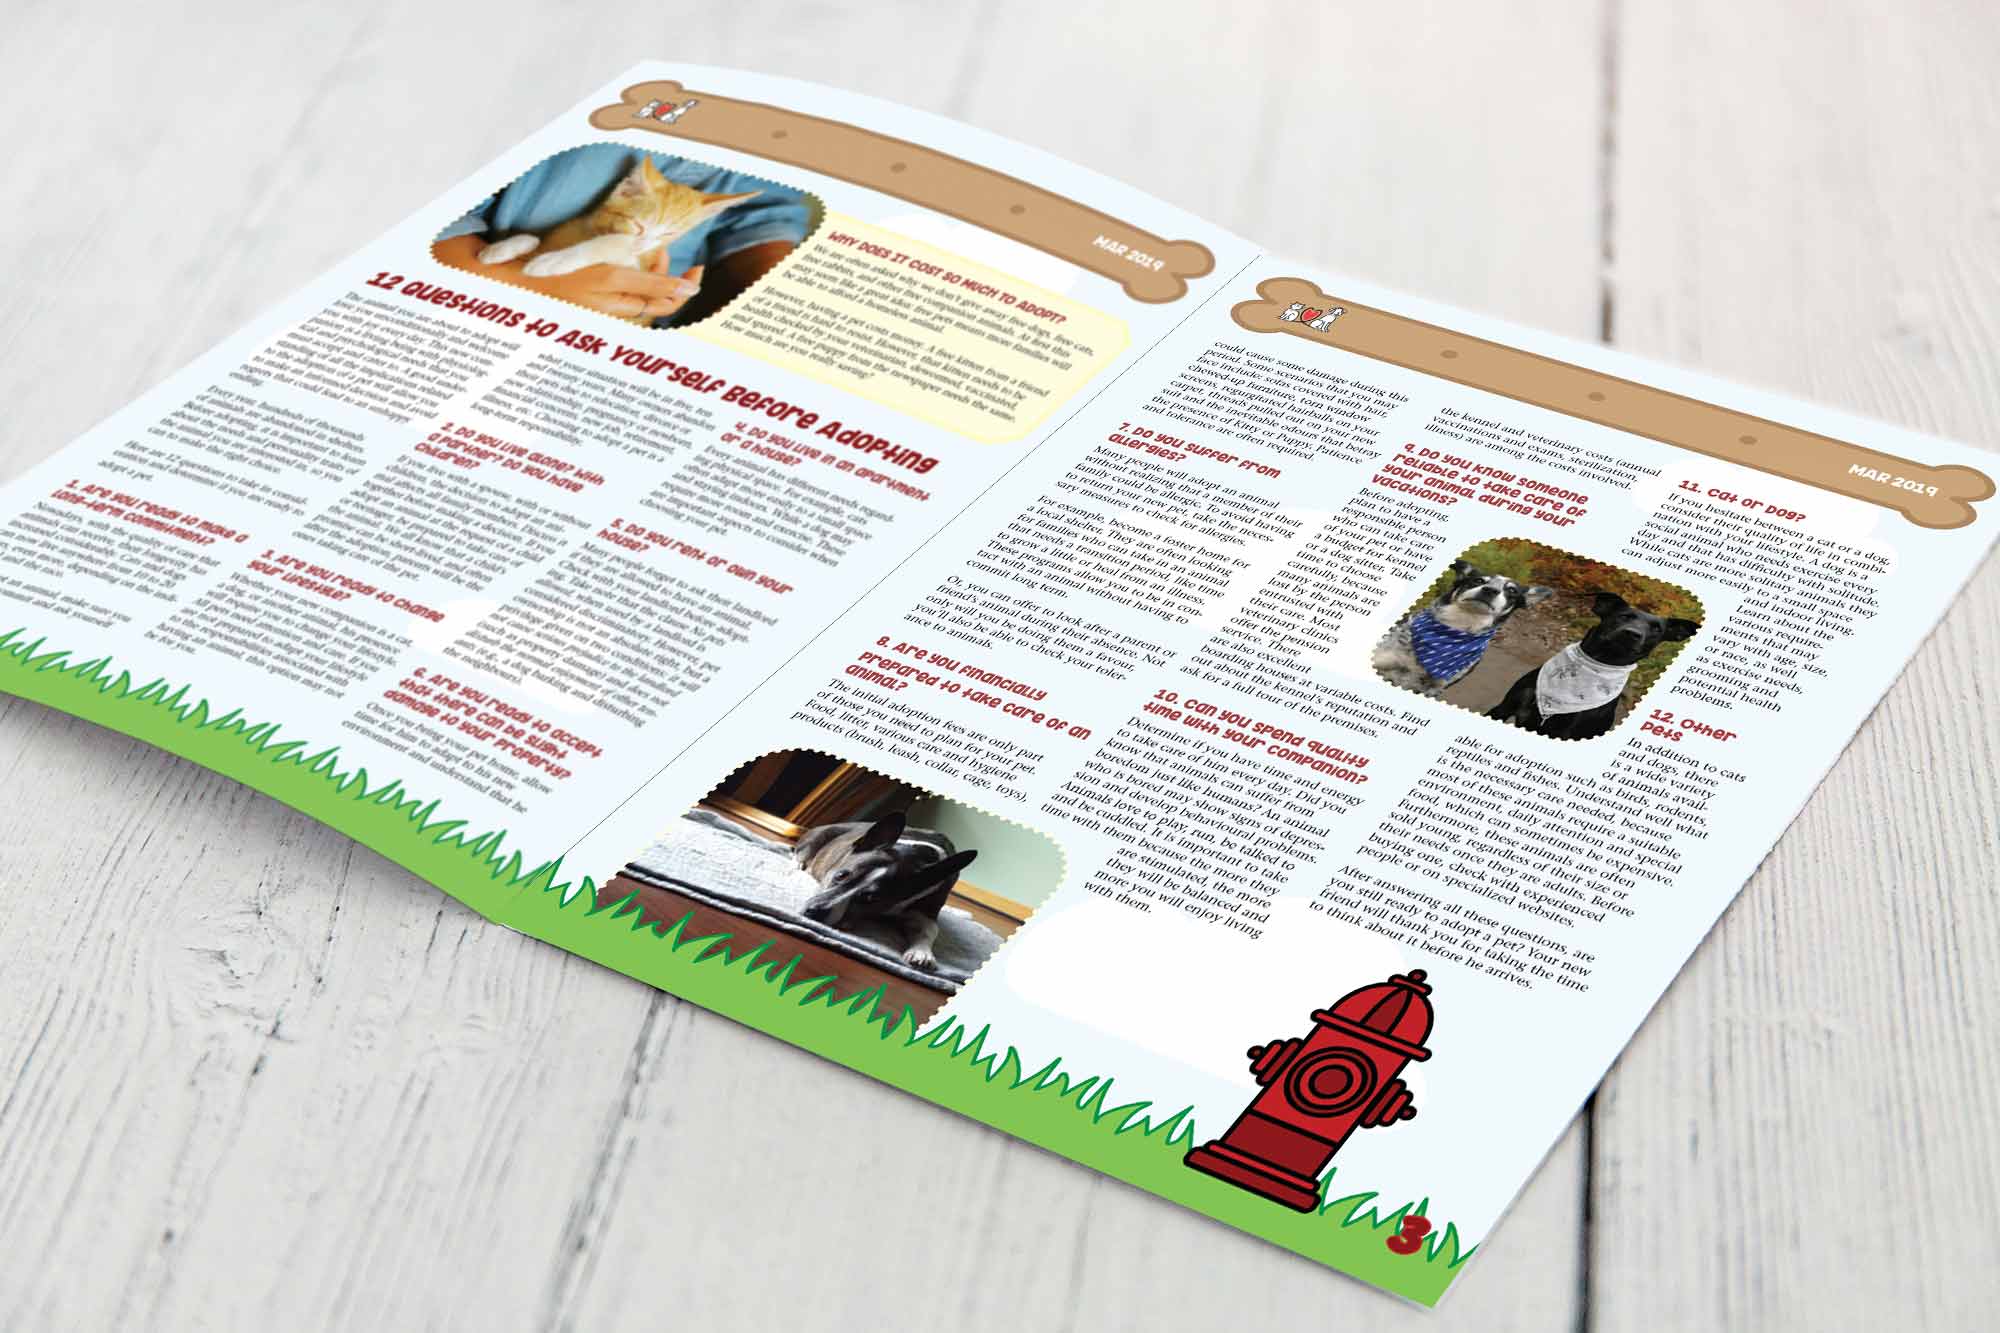 This is a mockup image of the adoption newsletter. It is laying flat, angled to show in inner spreads. The image has a light background, and page 3 is in focus.
